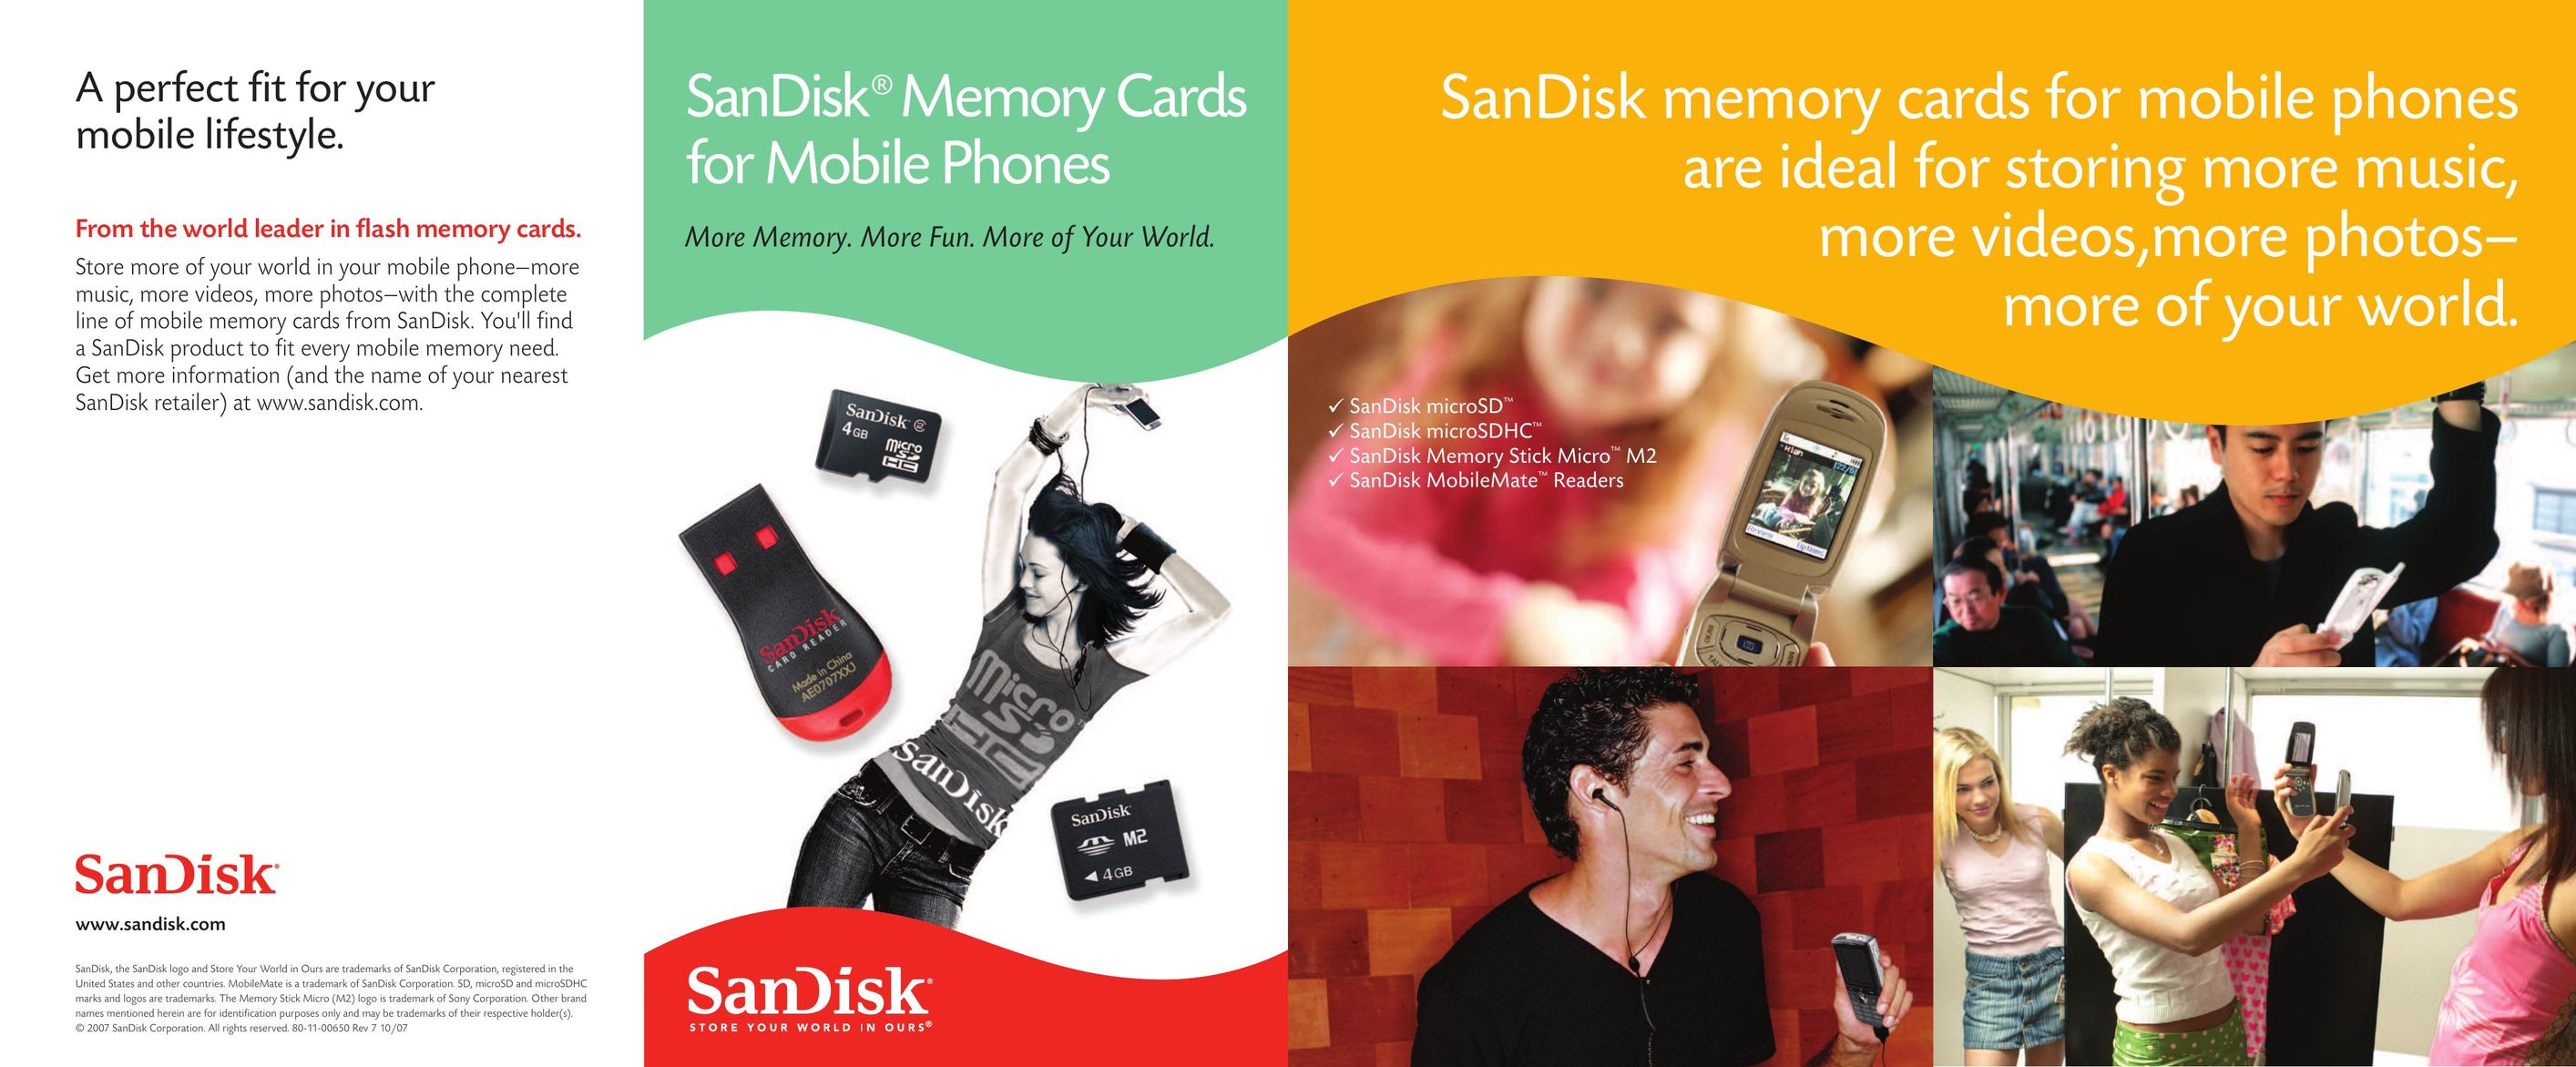 SanDisk MobileMate Readers Cell Phone Accessories User Manual